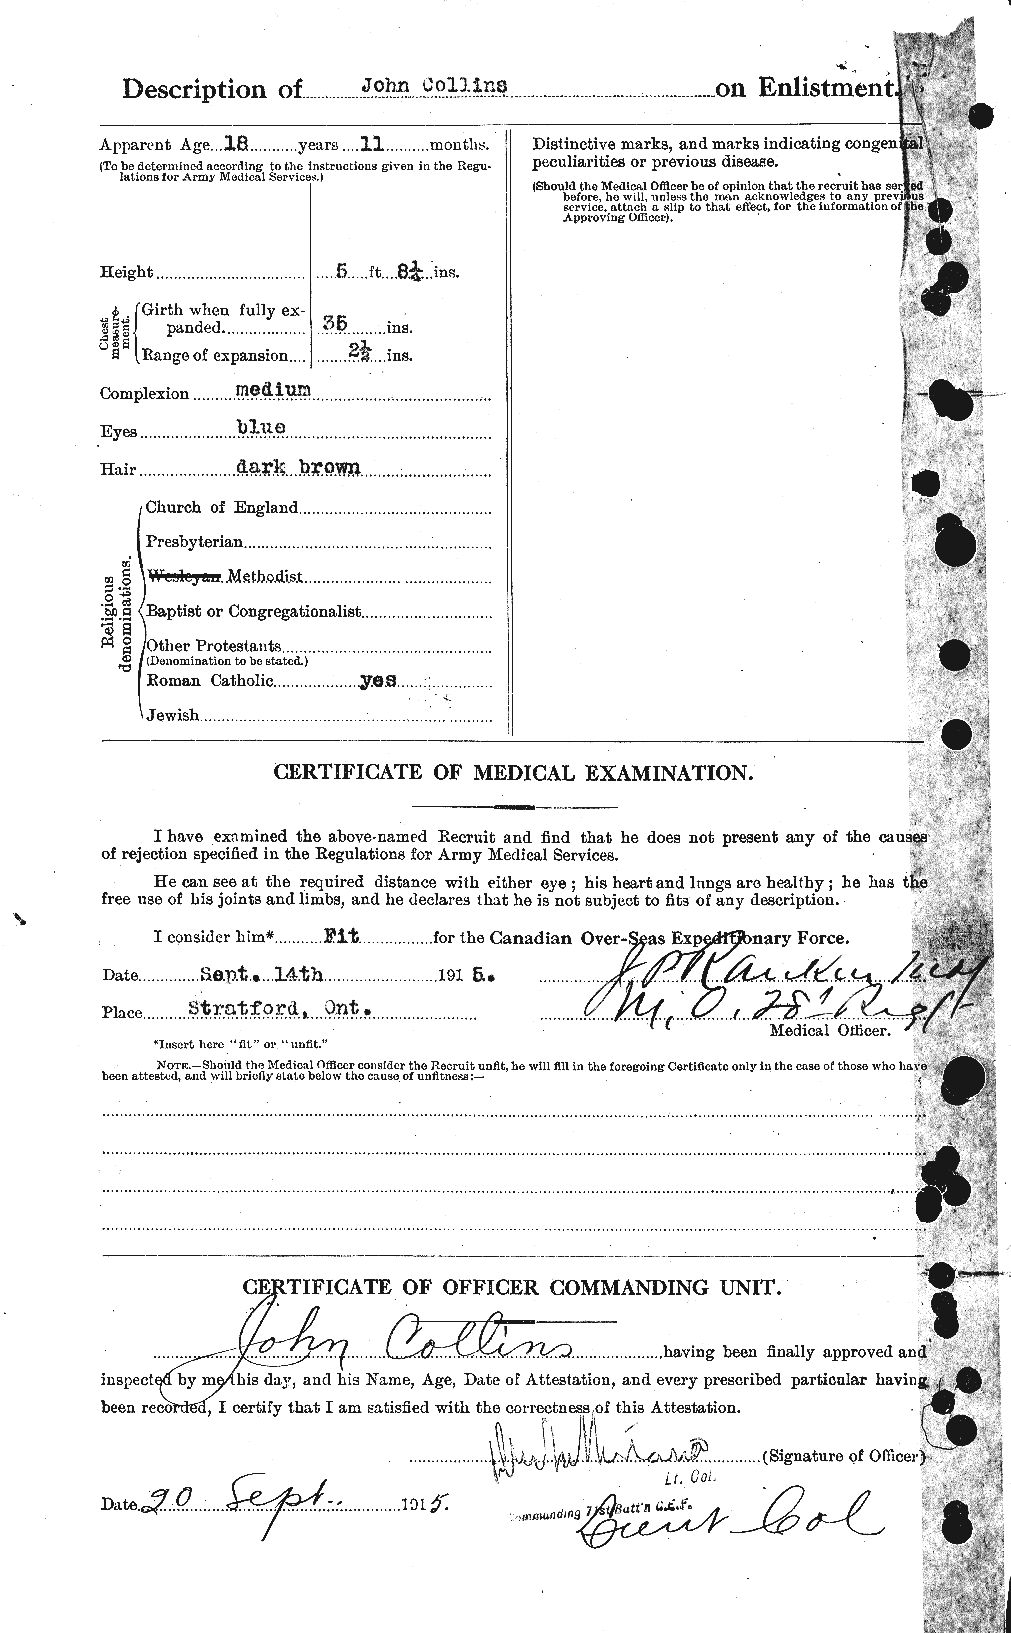 Personnel Records of the First World War - CEF 069813b